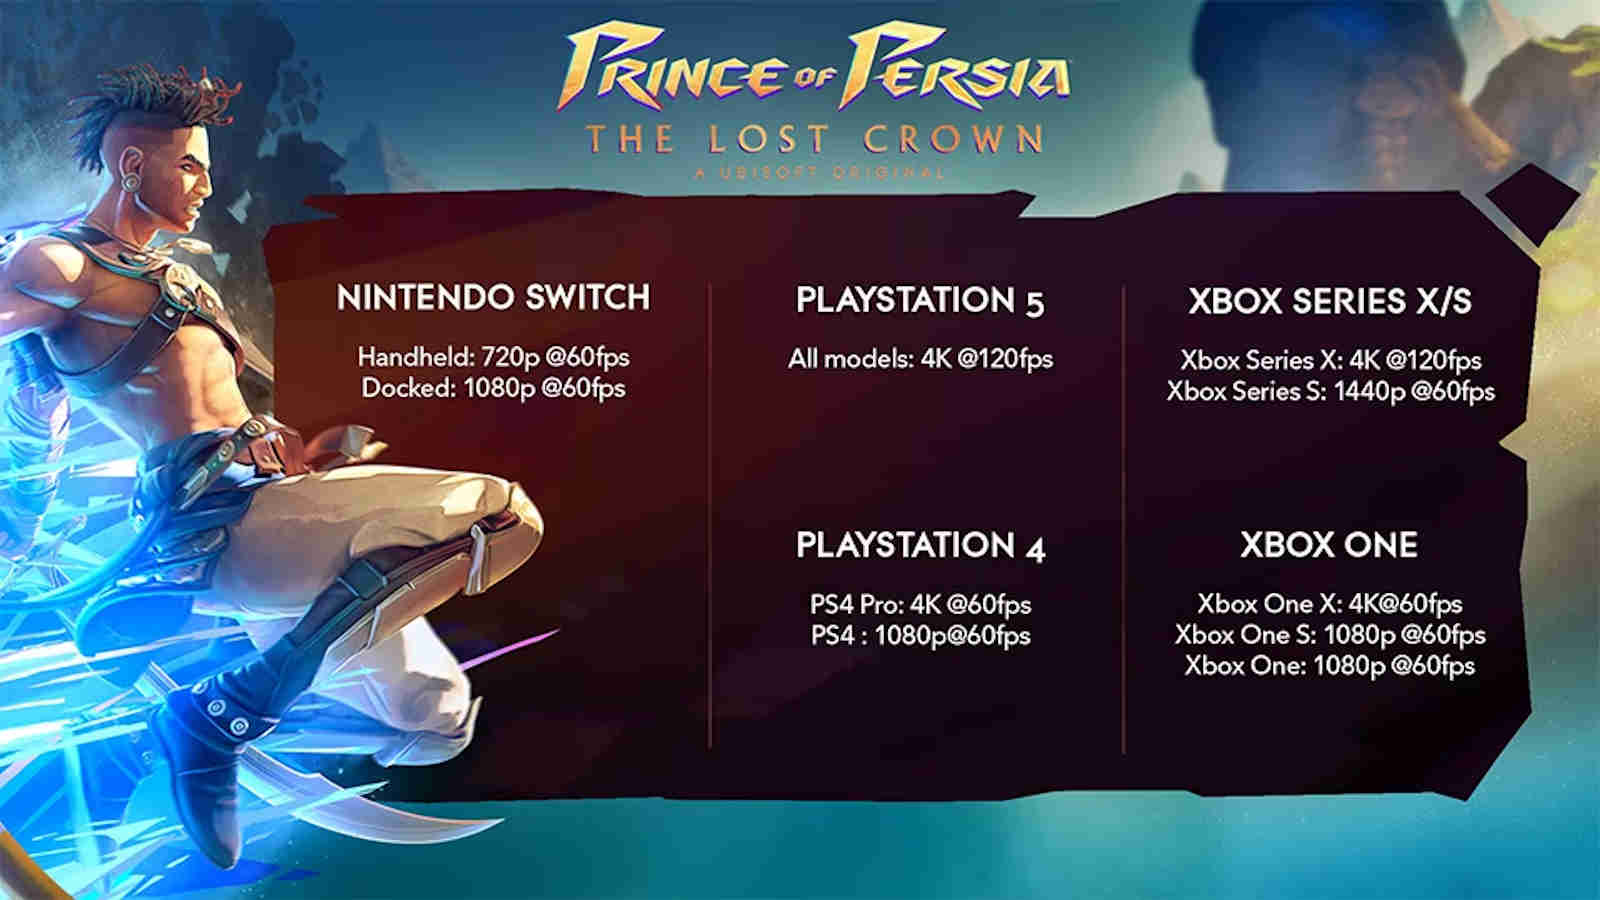 Prince of Persia: The Lost Crown Demo Download Released